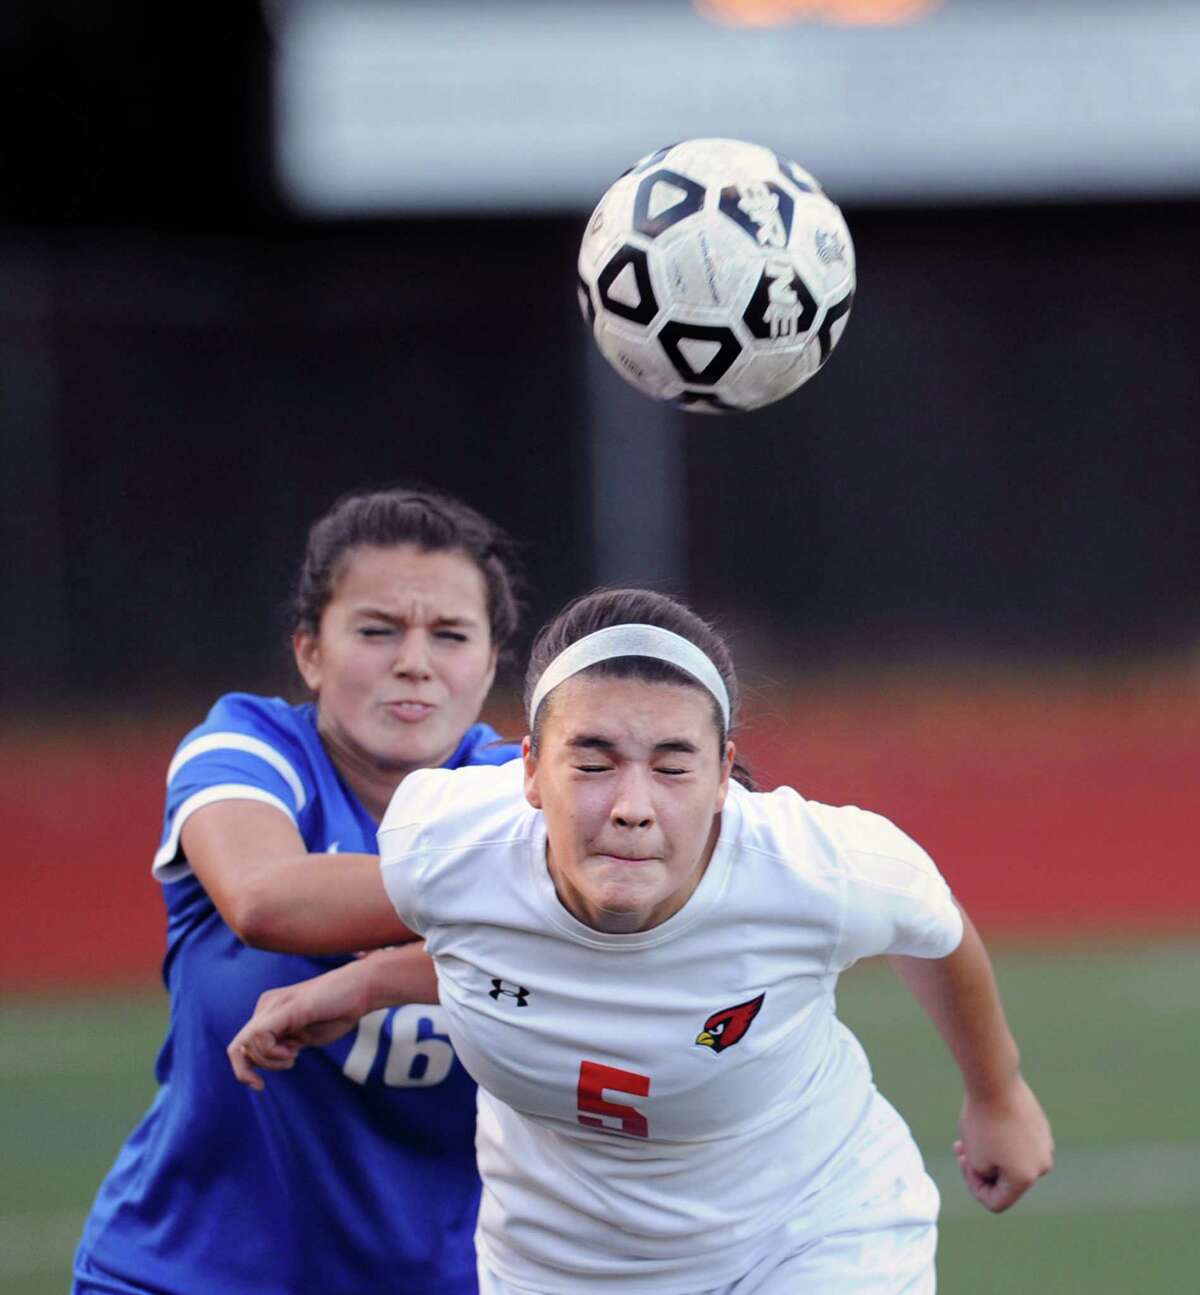 Kimberly Kockenmeister (5) of Greenwich heads the ball as Danbury's Taylor Izzo defends during action last season.